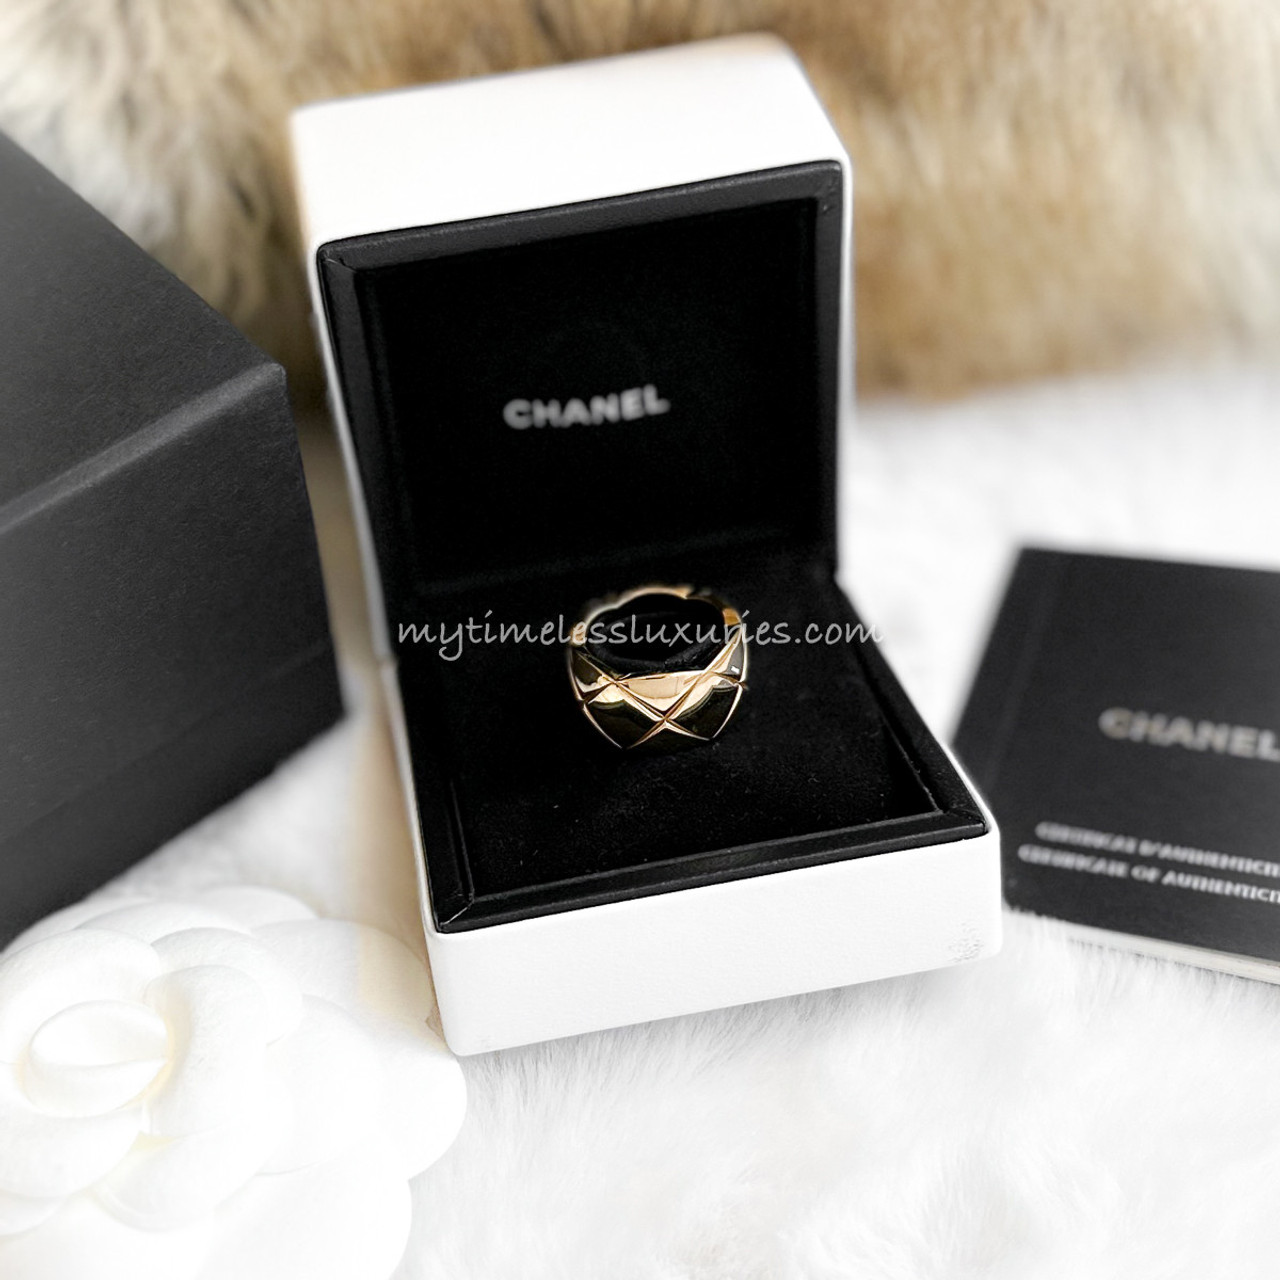 RESERVED Chanel Coco Crush 18k Yellow Gold Band Ring 11mm Size  Etsy